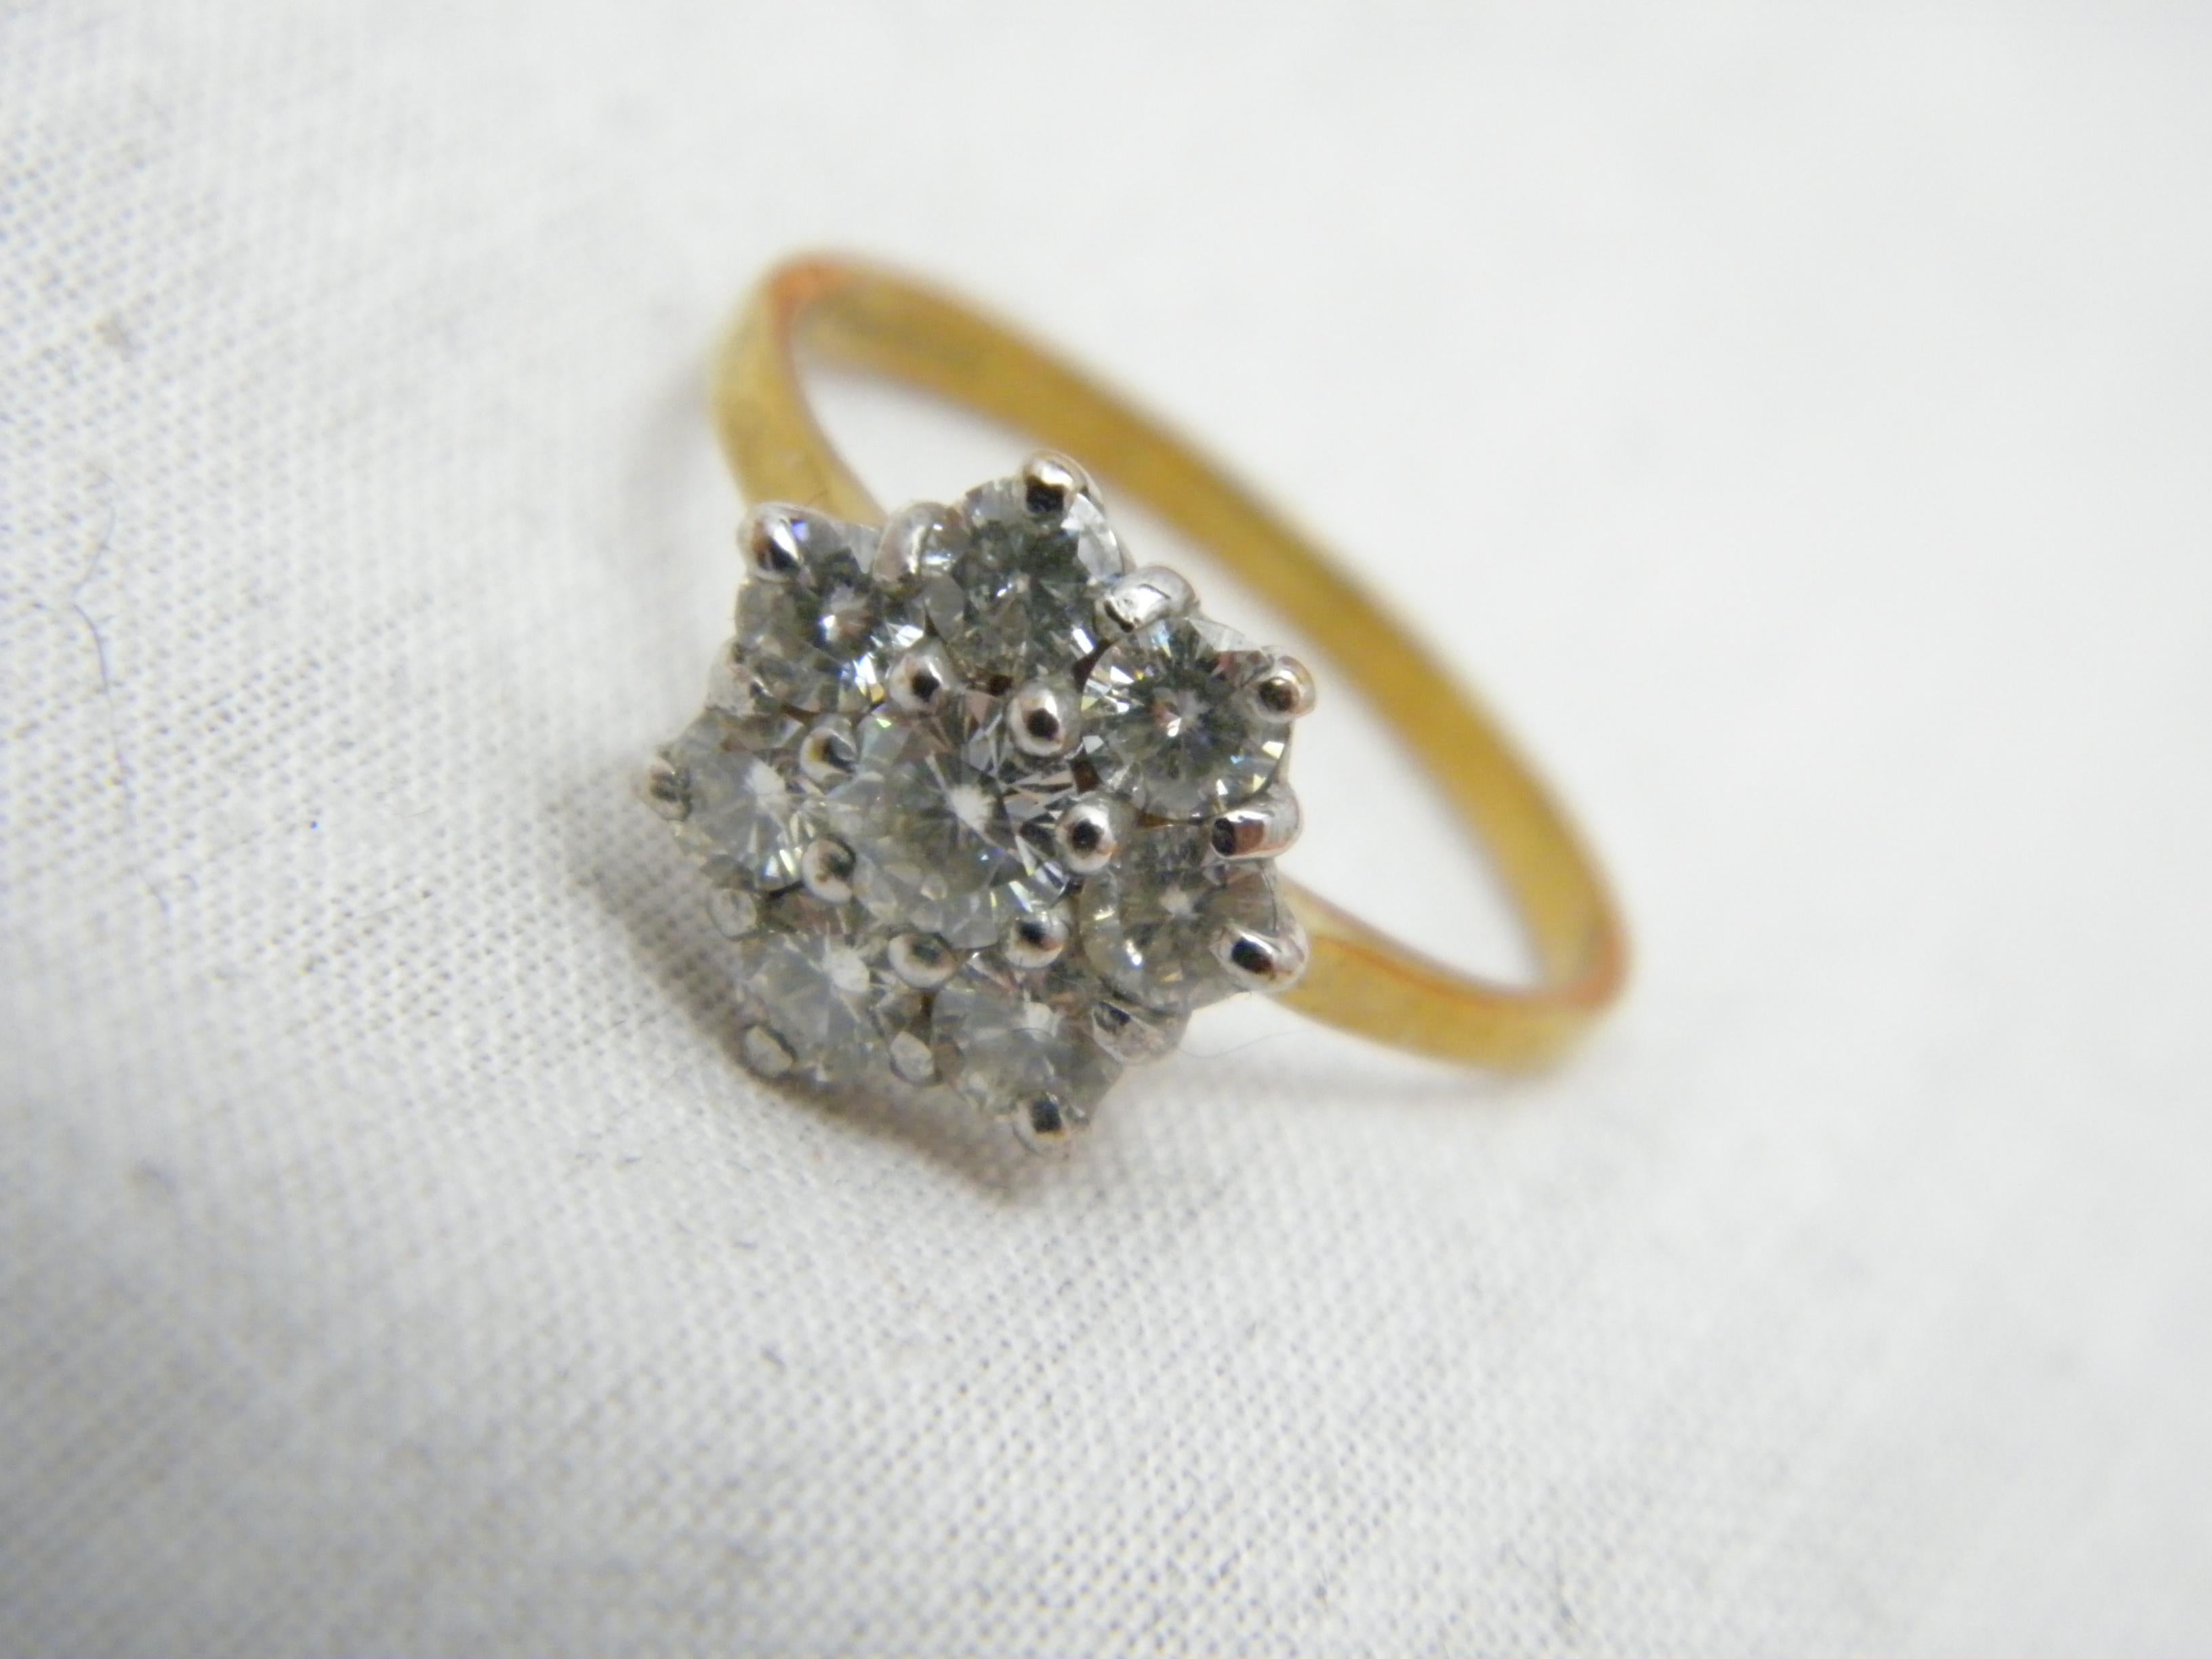 If you have landed on this page then you have an eye for beauty.

On offer is this truly stunning:
9CT GOLD DIAMOND DAISY CLUSTER ENGAGEMENT RING

DETAILS
Material: 9ct 375/000 Yellow Gold
This ring has a sturdy shank hence ideal if resizing